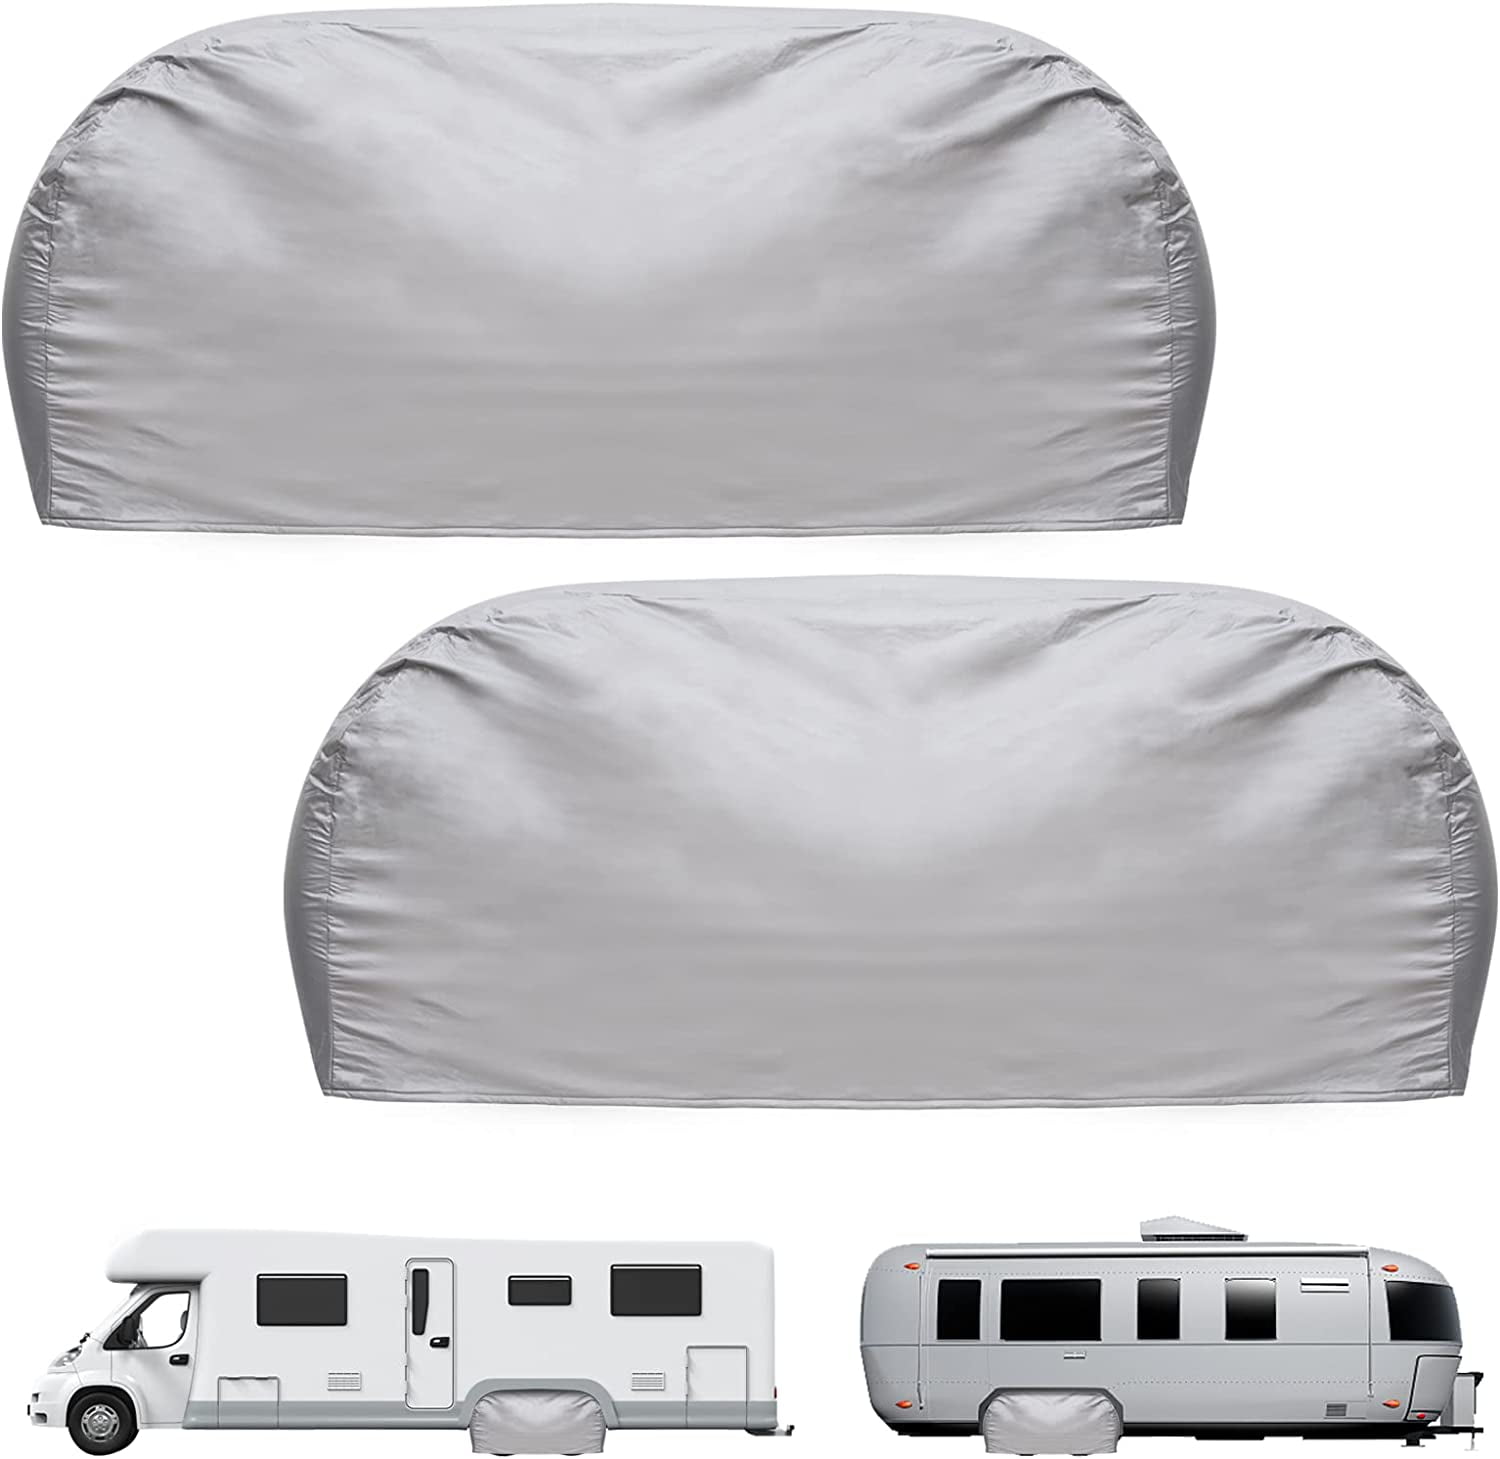 Pcs Dual-Axle RV Tire Covers for Trailers 30